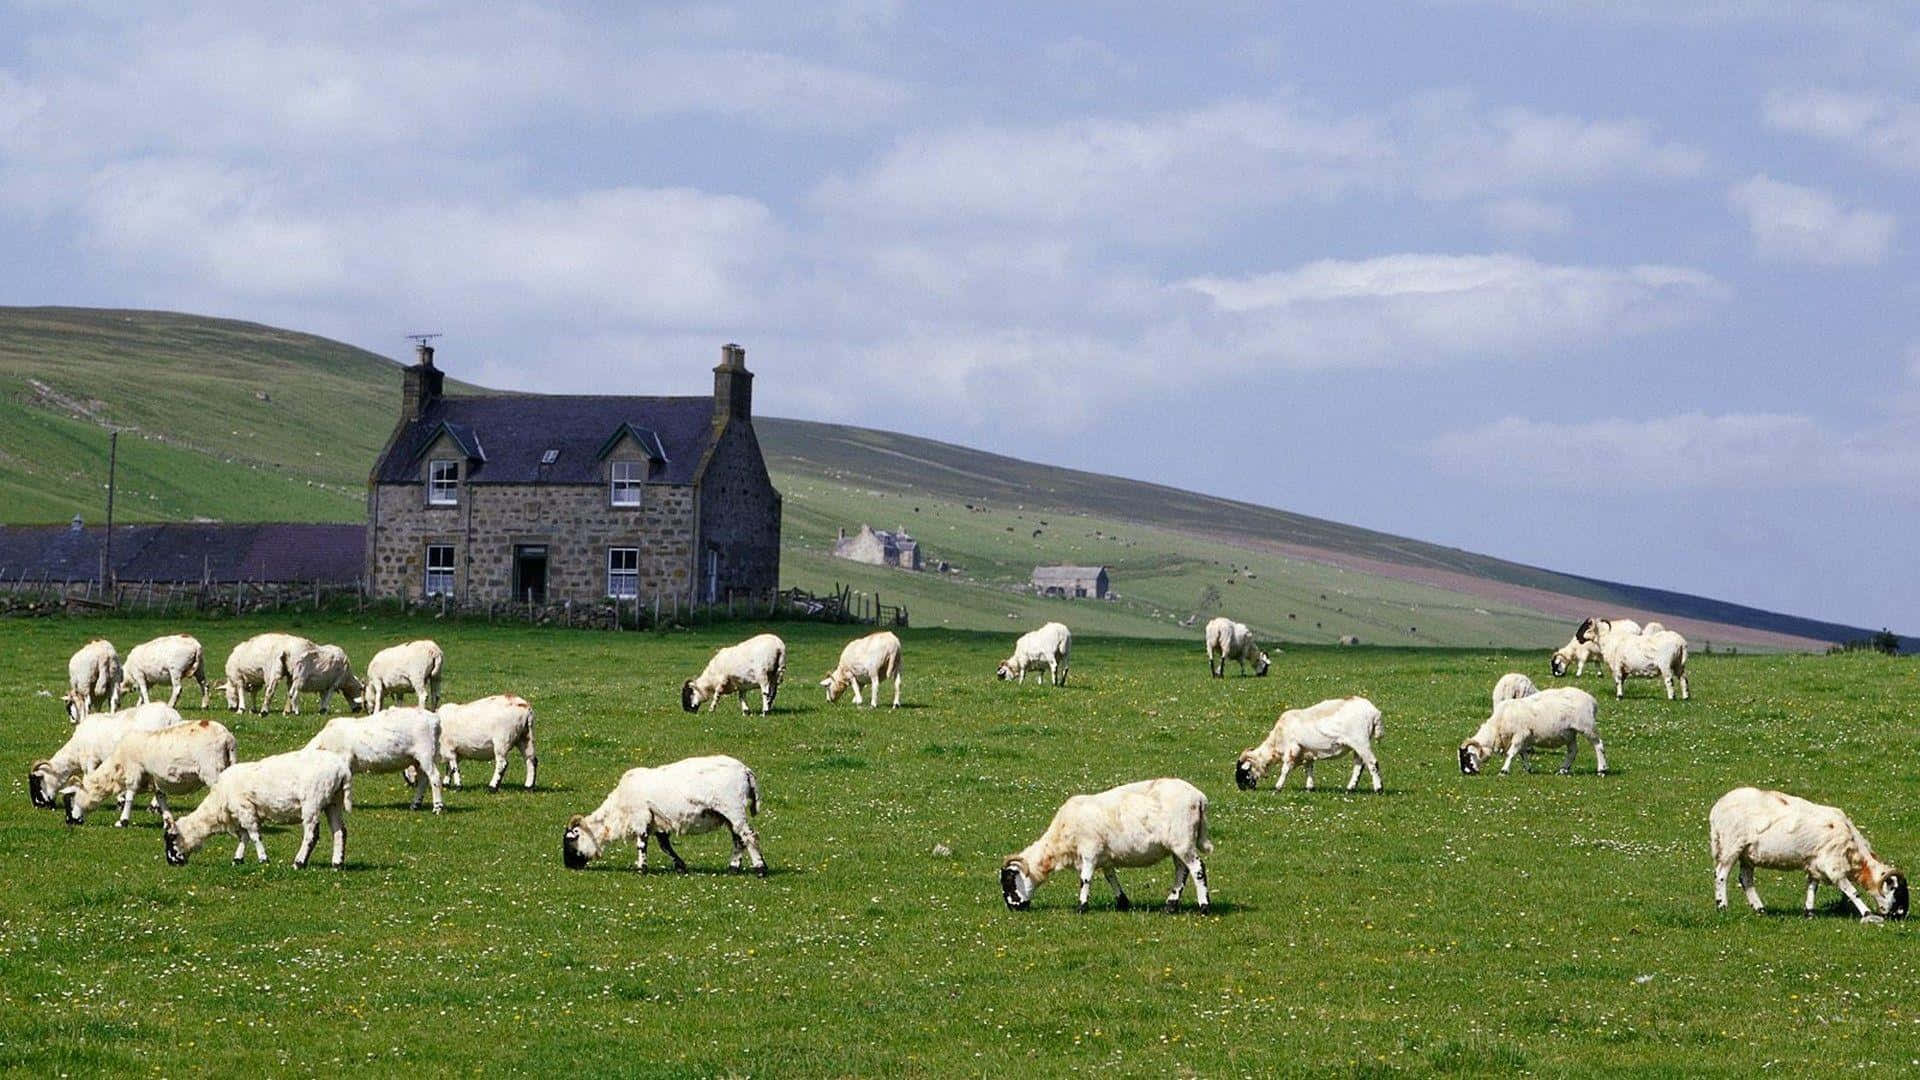 Pastoral Farmhouse With Sheep Wallpaper